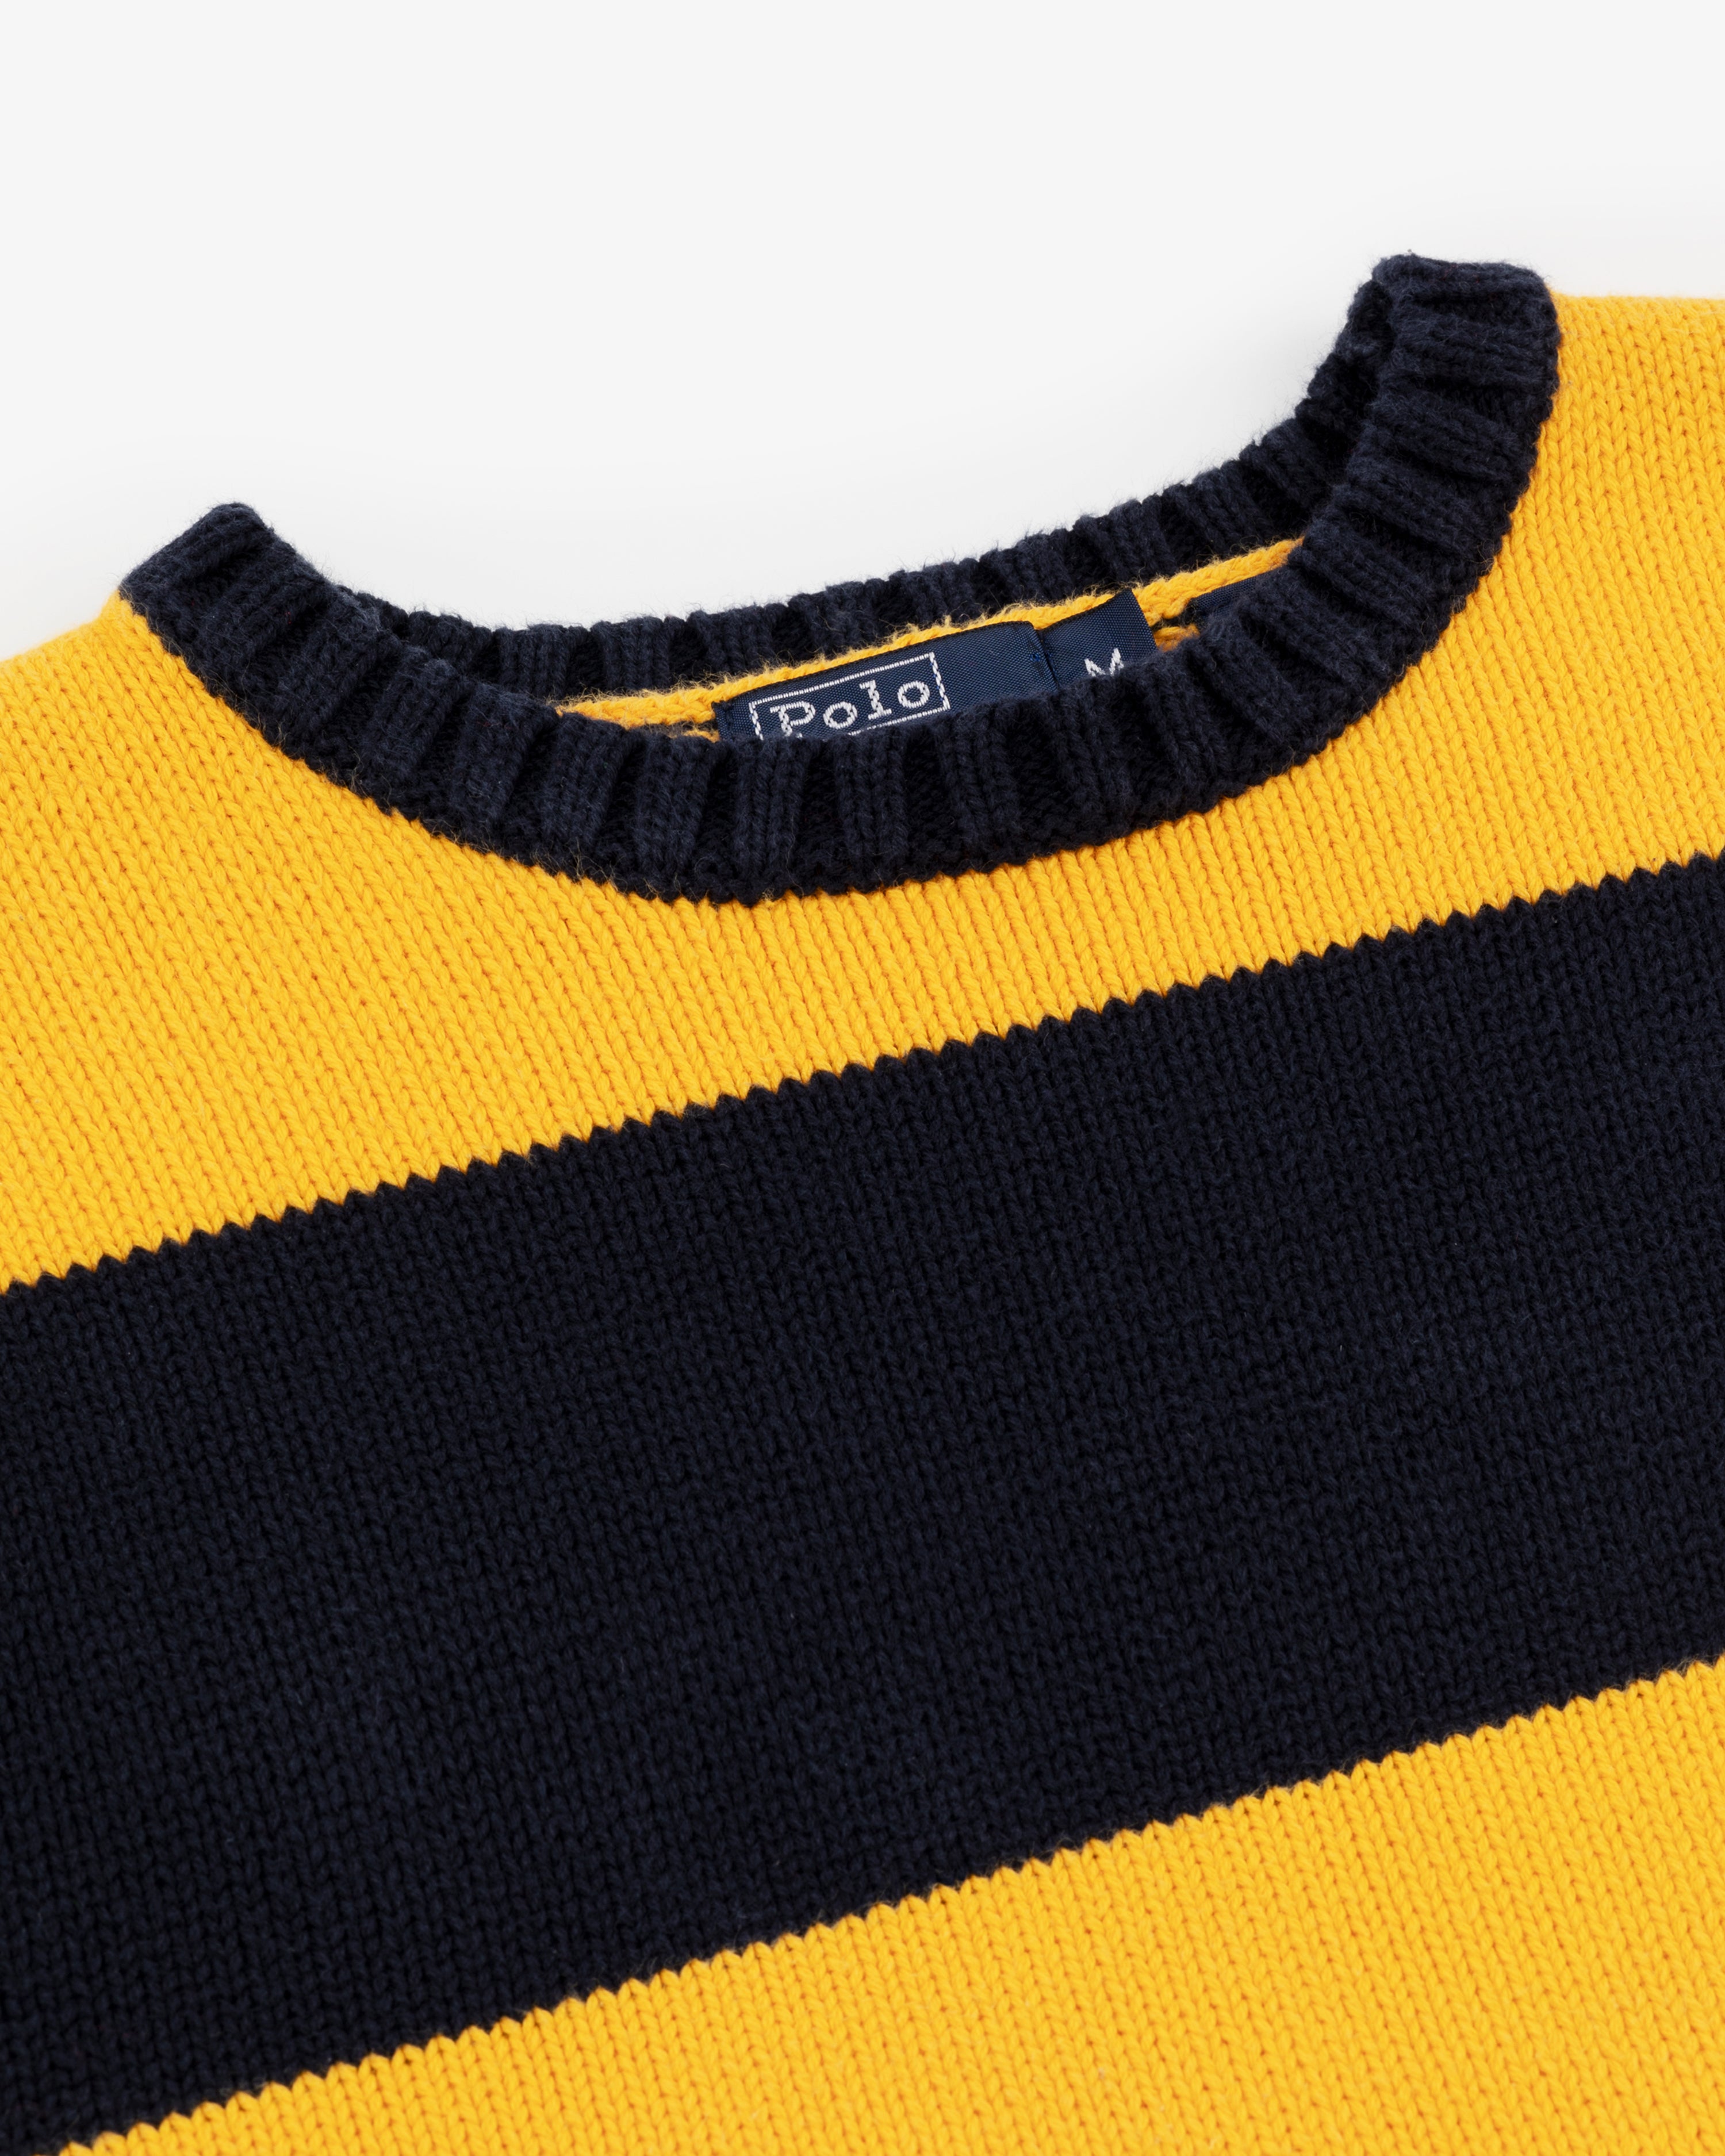 Vintage Polo Striped Sweater